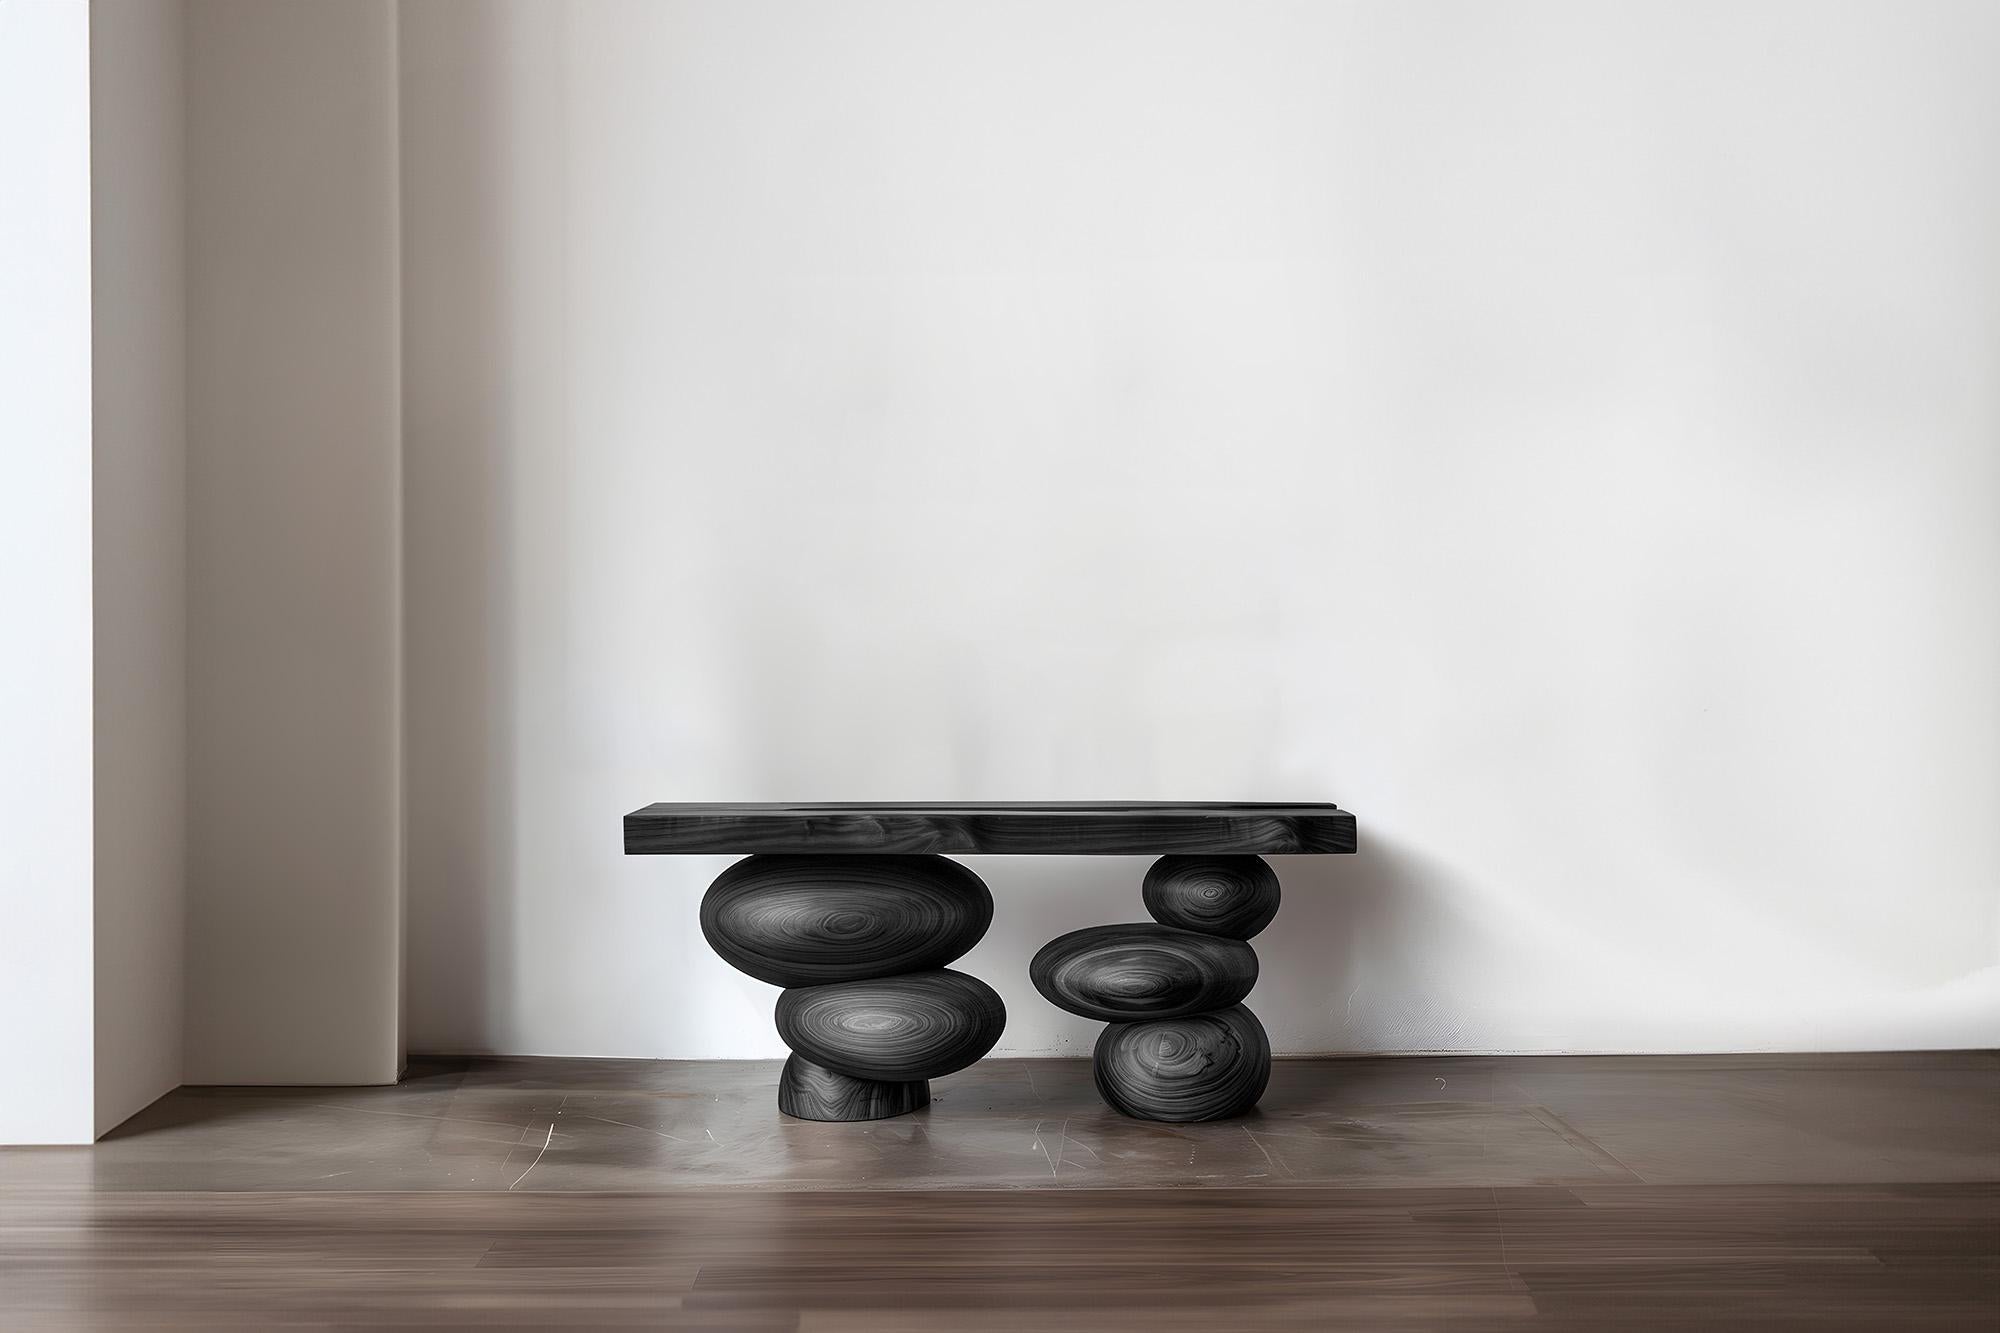 NONO Elefante Table 28, Joel Escalona Design, Refined Curves
—————————————————————
Elefante Collection: A Harmony of Design and Heritage by NONO

Crafting Elegance with a Modernist Touch

NONO, renowned for its decade-long journey in redefining